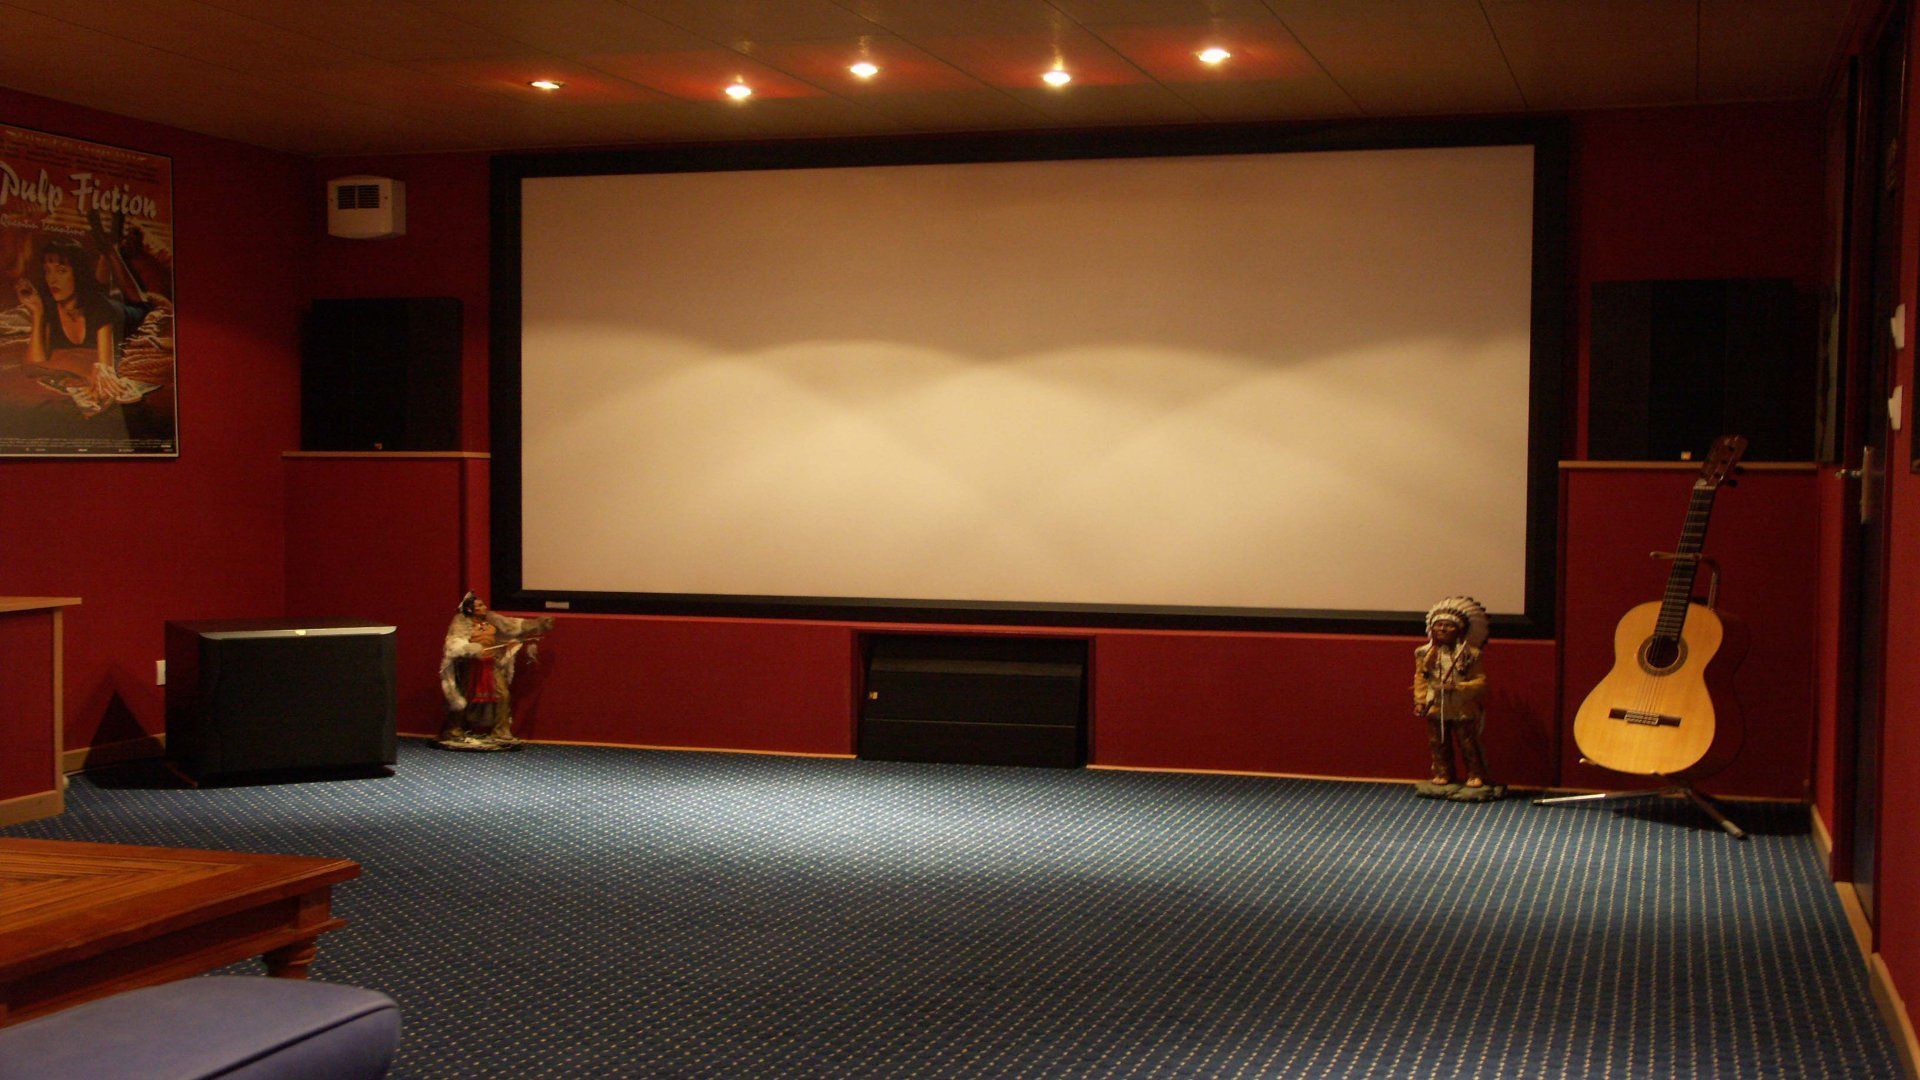 Home Theaters - Home Cinema - Home Theater Backdrops & Backgrounds